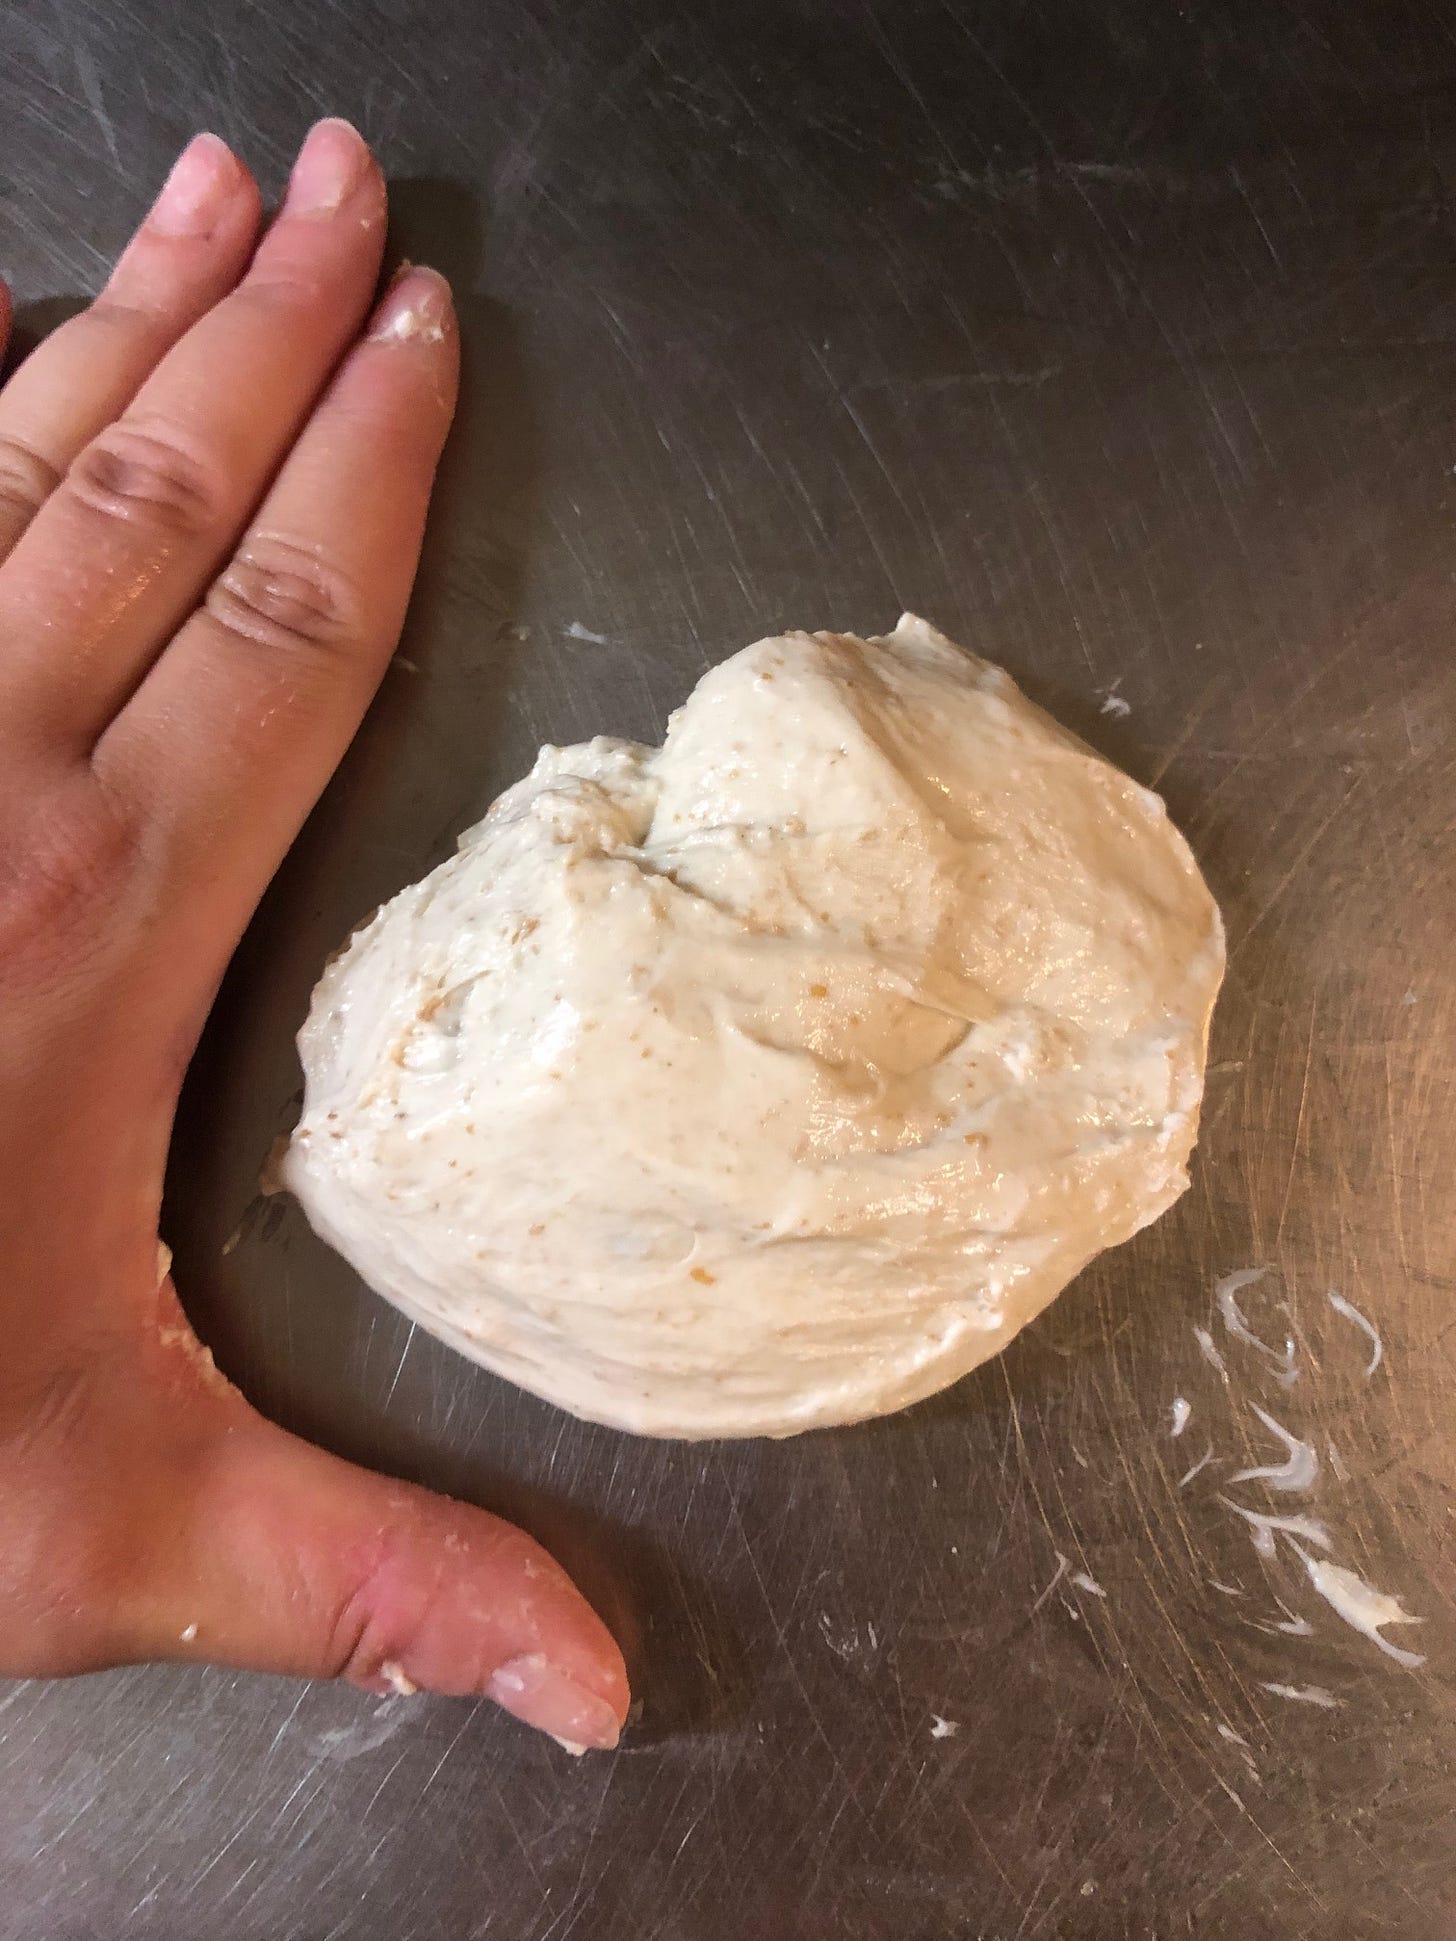 Left hand, palm down, on a metal table next to a piece of raw unshaped dough.